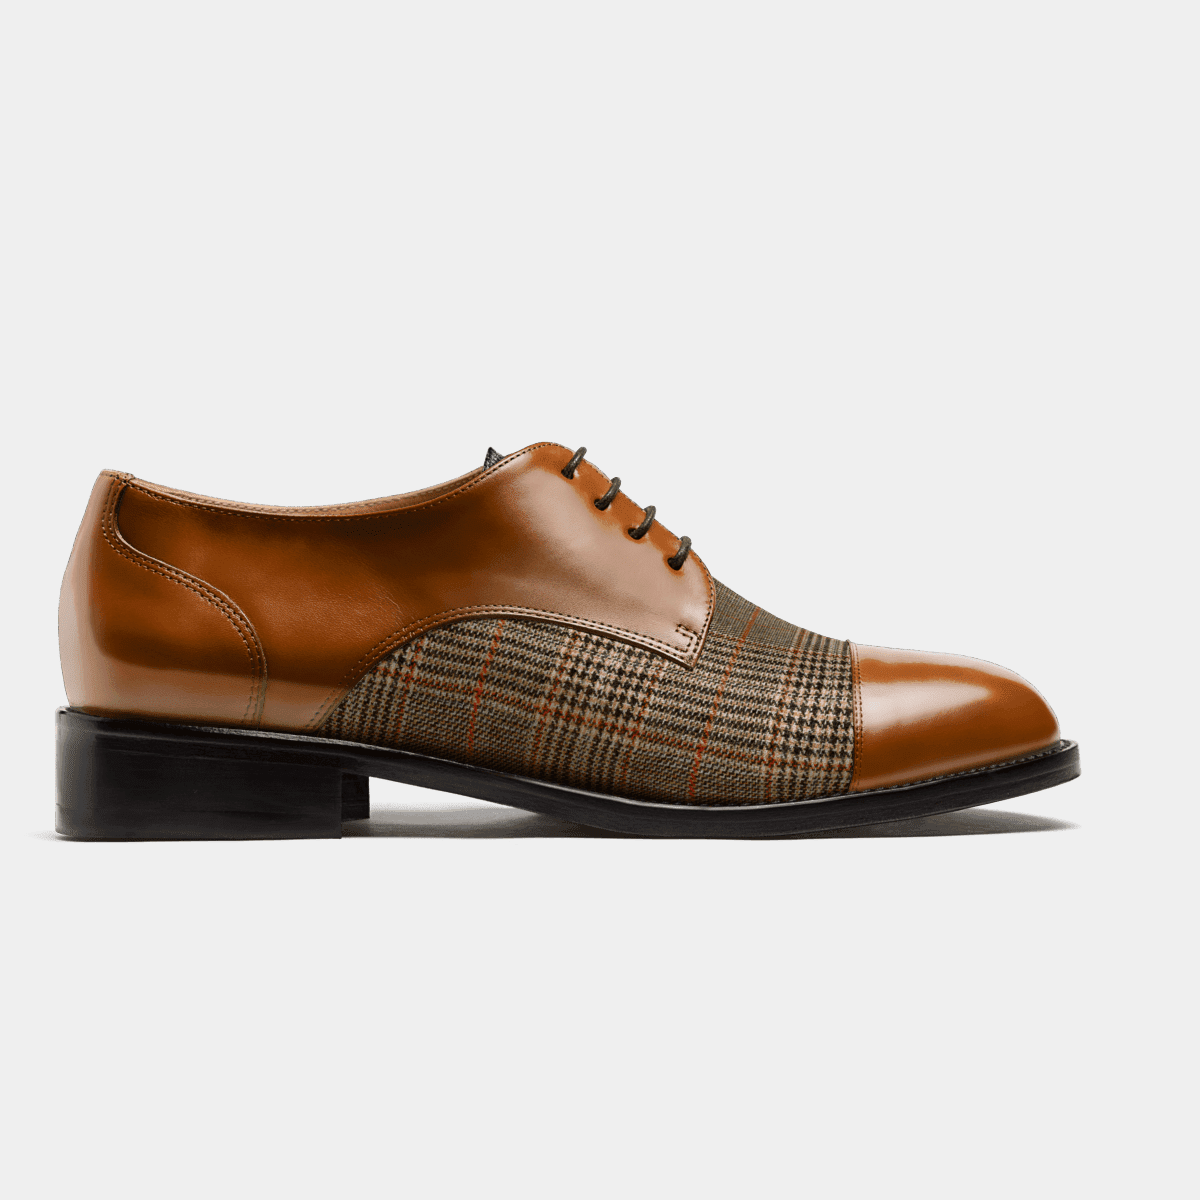 Cap toe Derby shoes - brown flora leather & tweed $198 | Sumissura